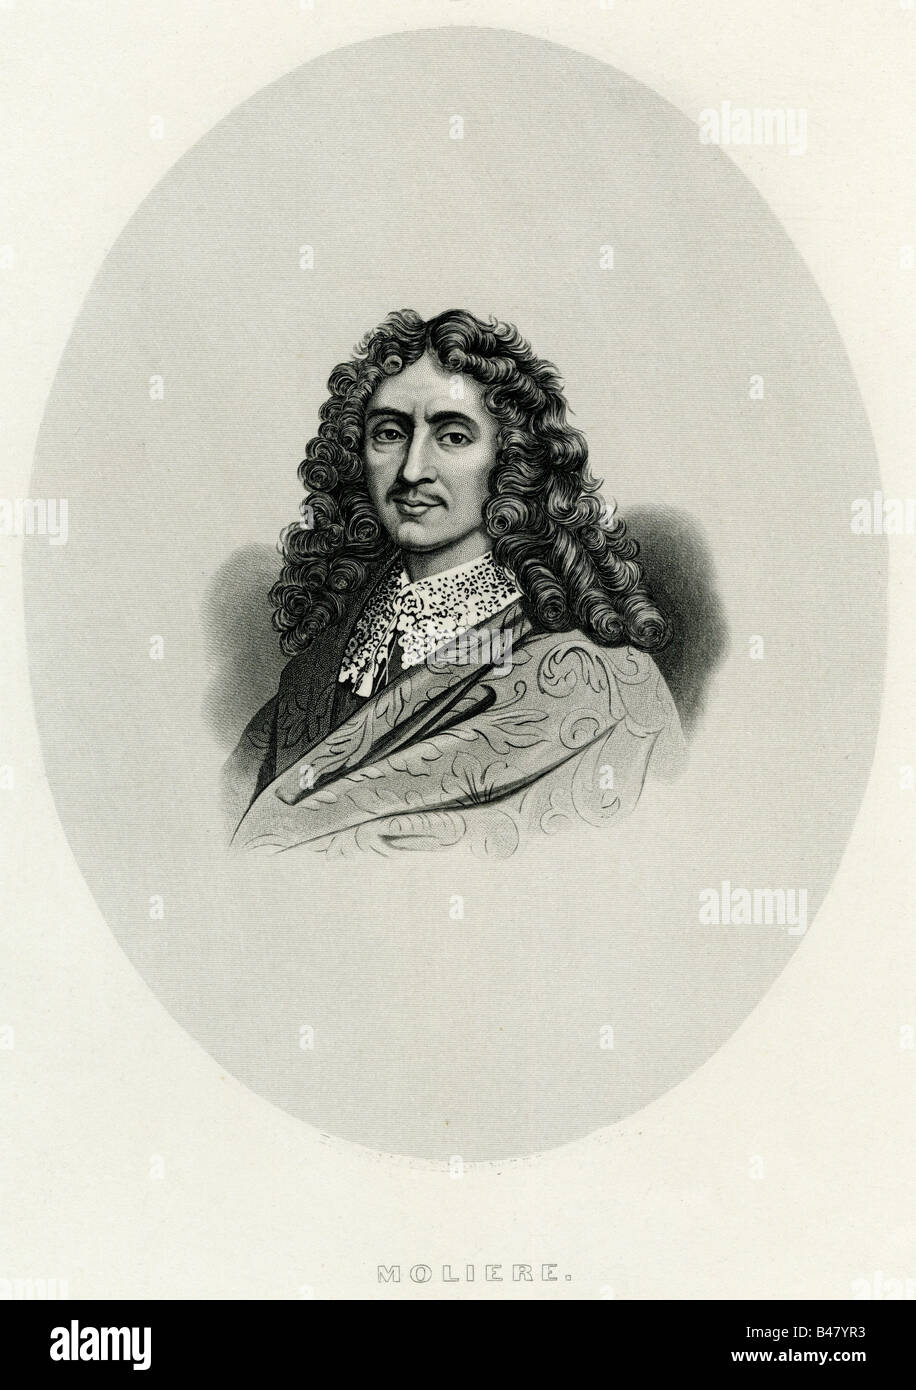 Moliere, 15.1.1622 - 17.2.1673, French author/writer and theatre director, portrait, engraving, 19th century, , Artist's Copyright has not to be cleared Stock Photo